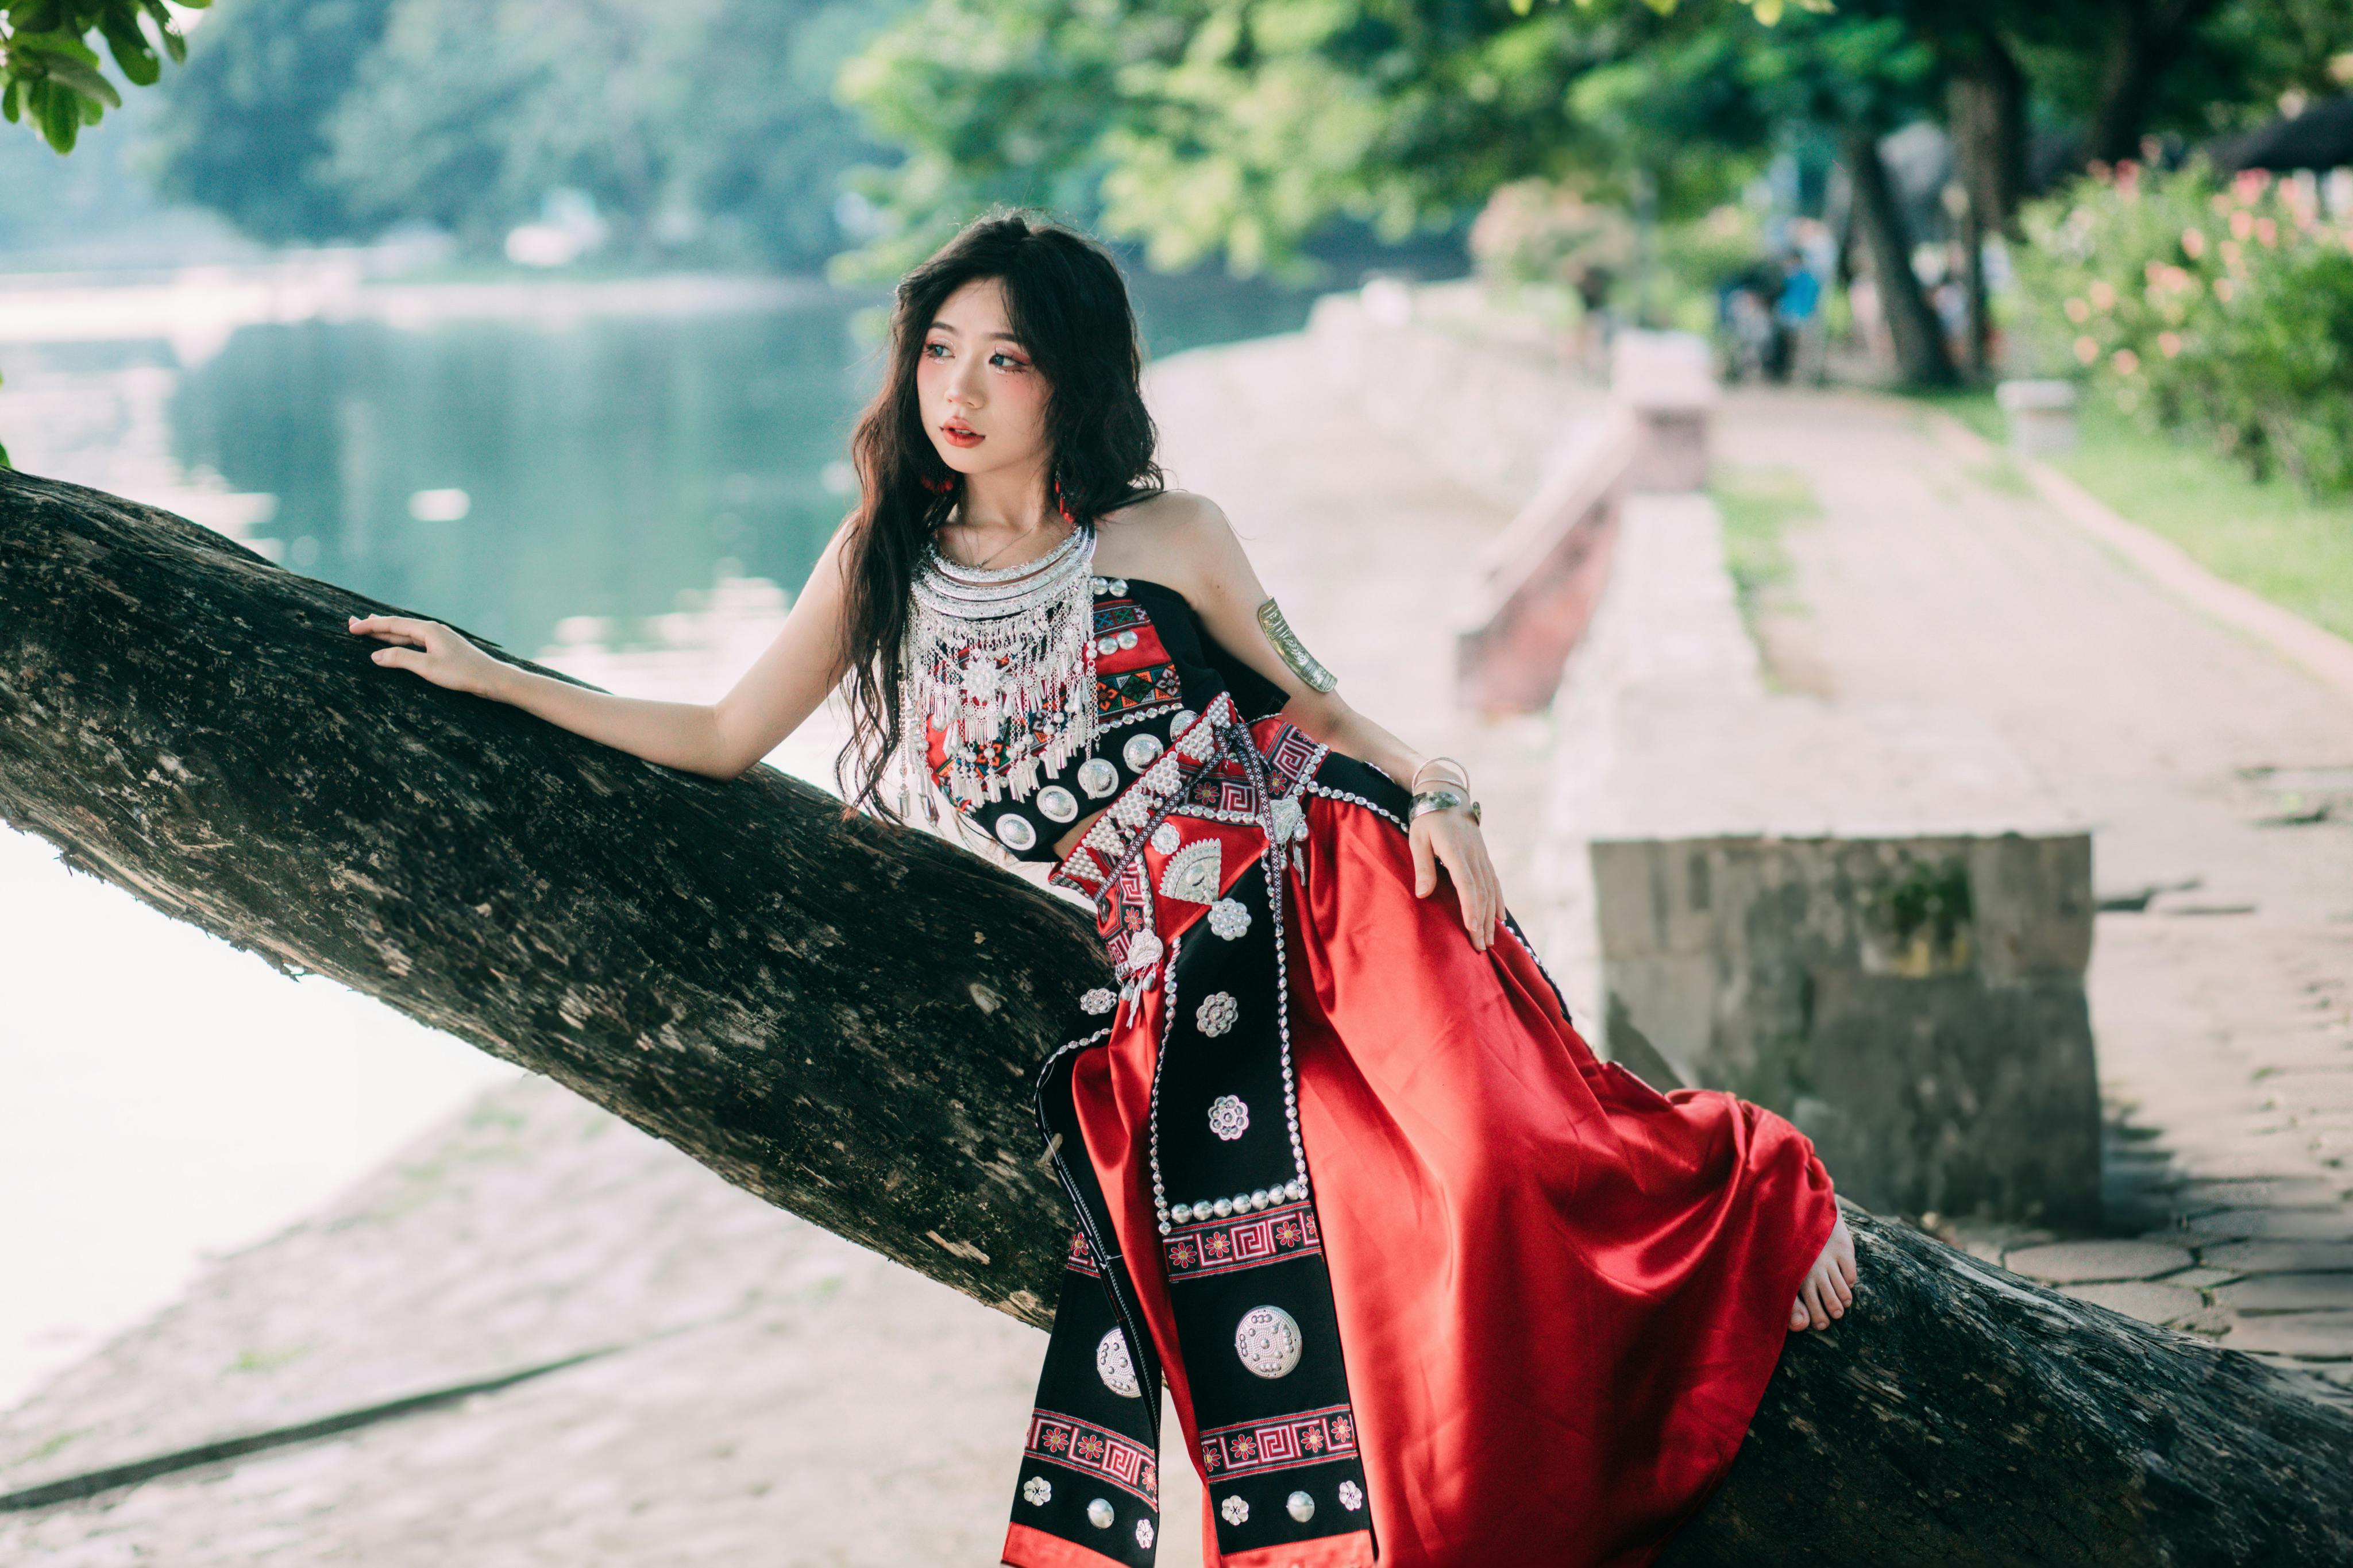 QNS 24x7 - A girl wearing traditional dress poses for a... | Facebook